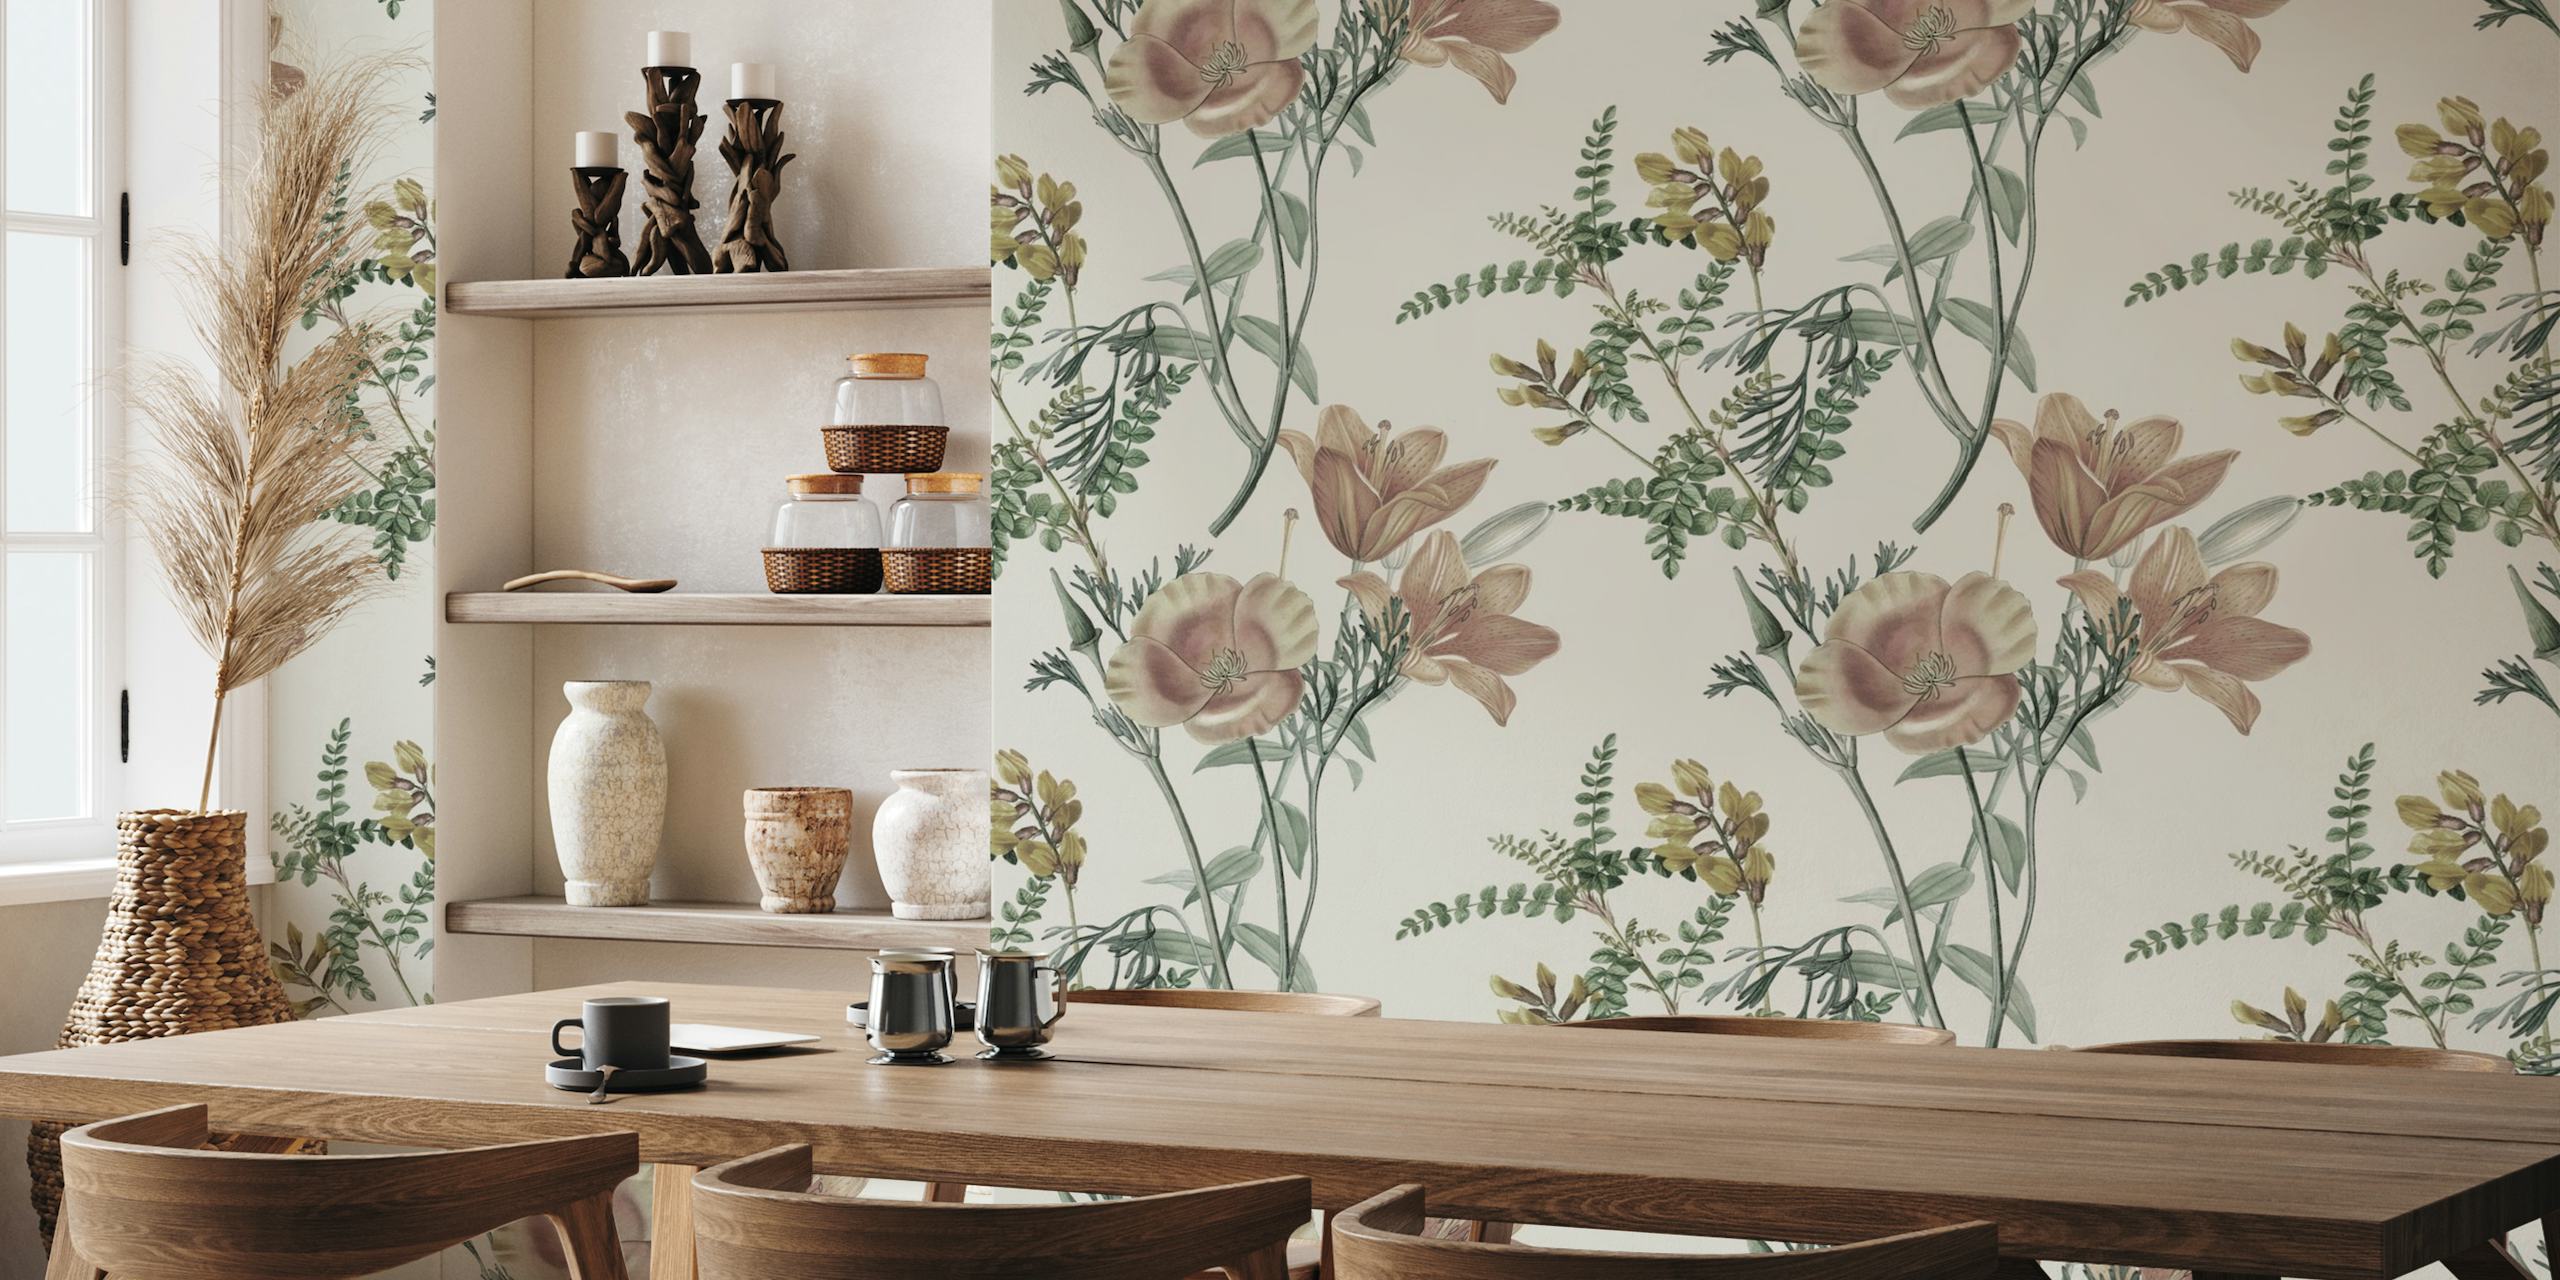 Pastel-toned wildflowers and greenery wall mural for home decor